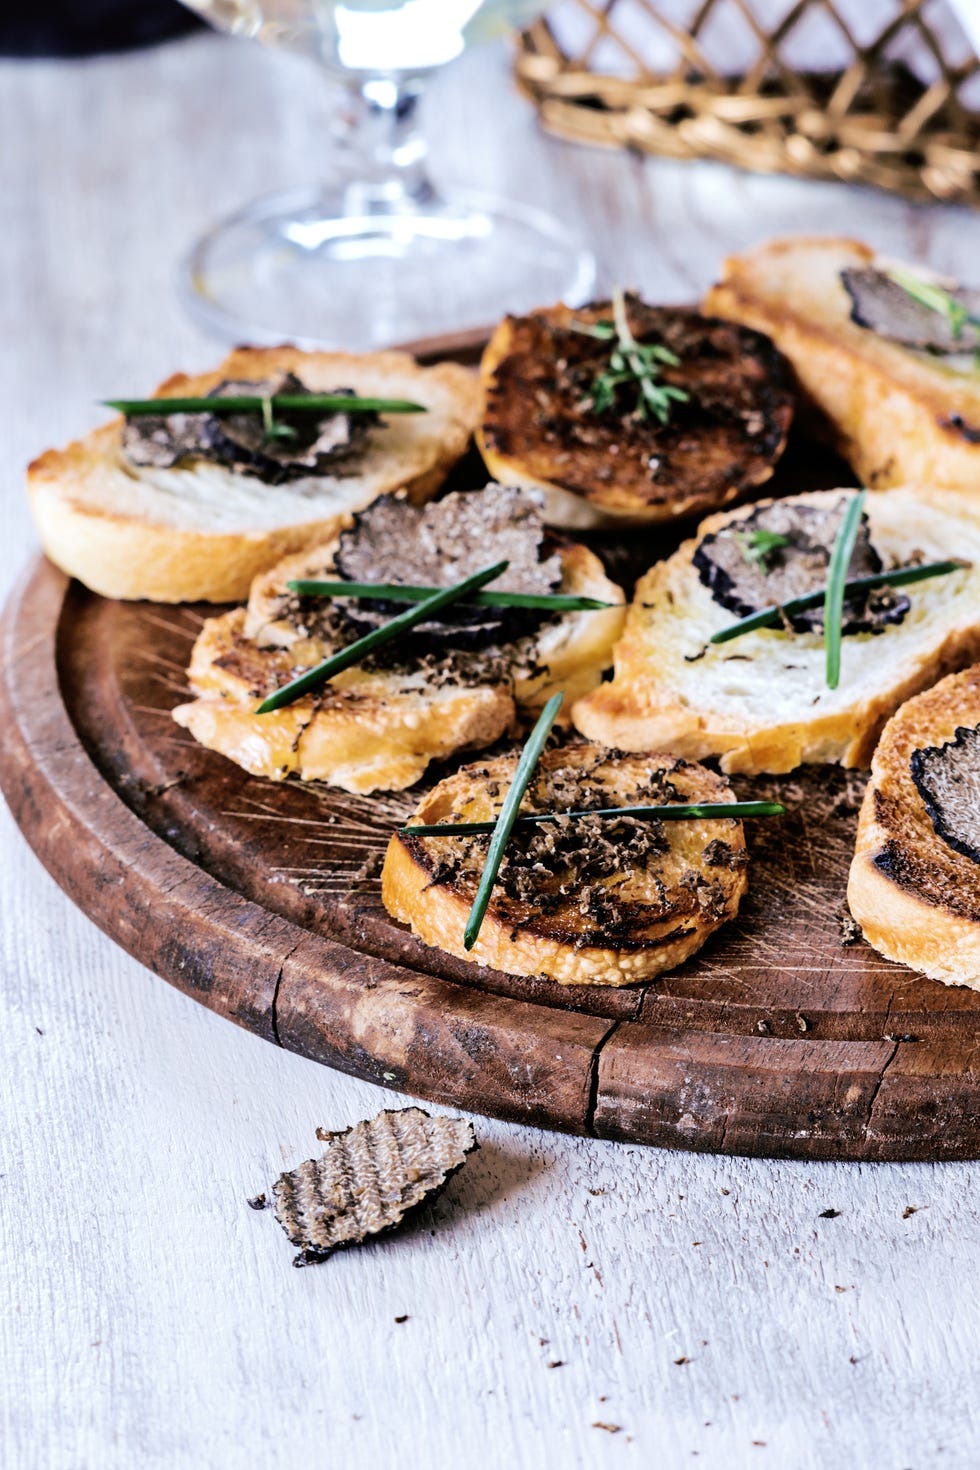 Italian black truffle bruschetta with herbs and oil on grilled or toasted crusty ciabatta bread